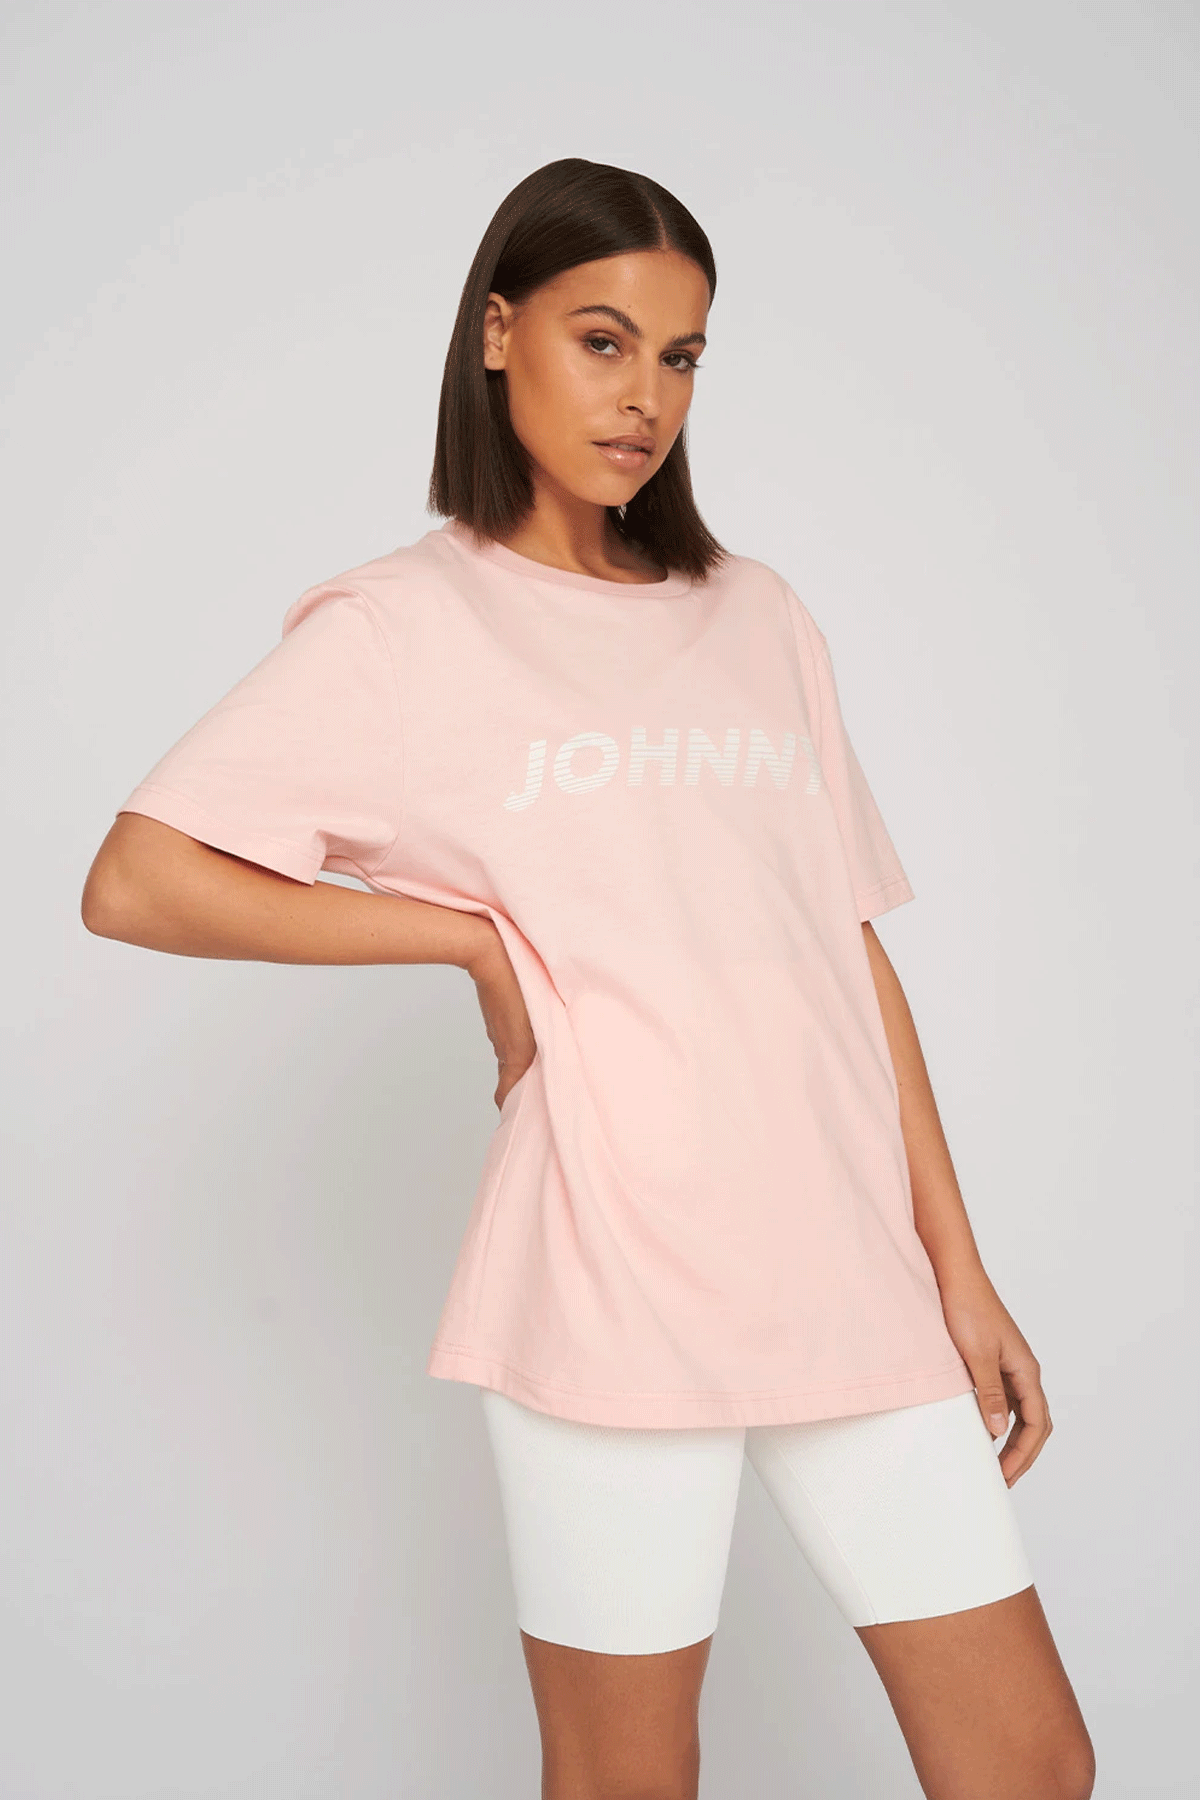 By Johnny Johnny Rush Tee Pink White